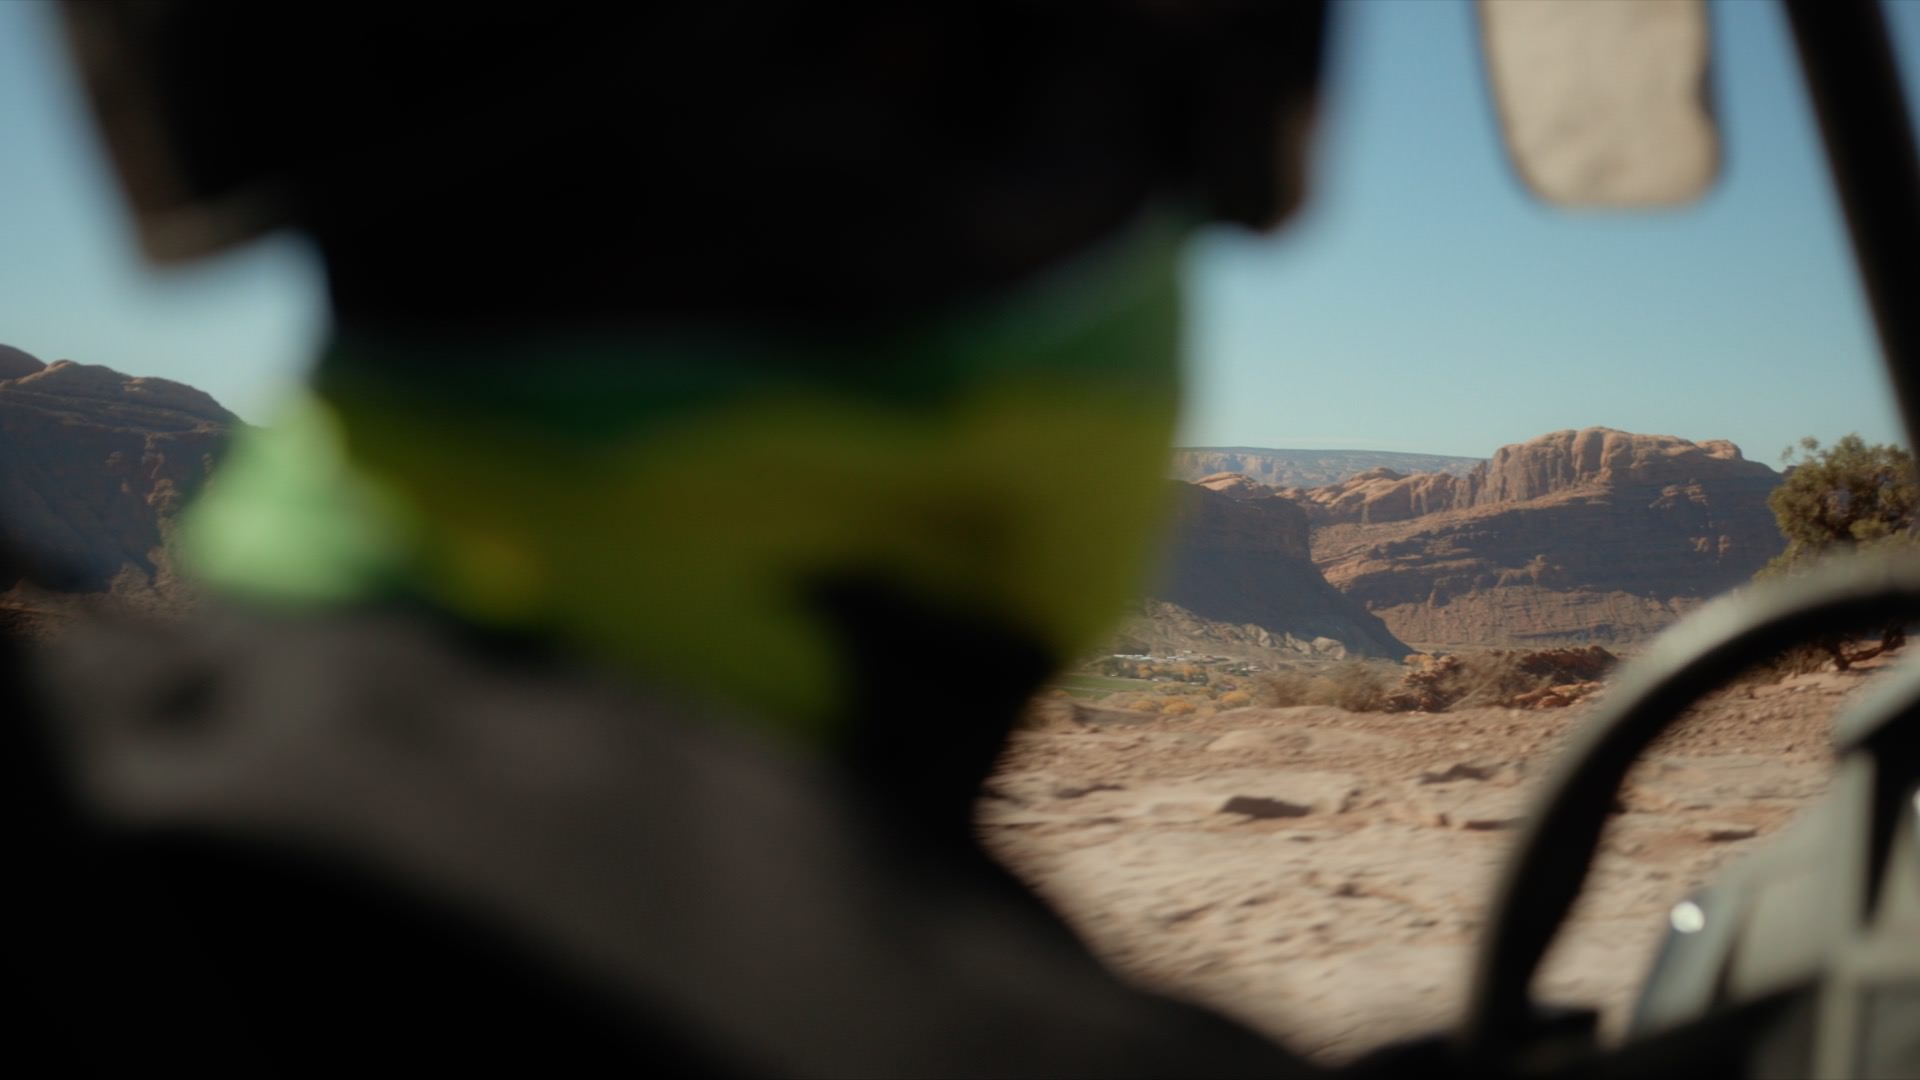 driver's perspective of an ATV in moab